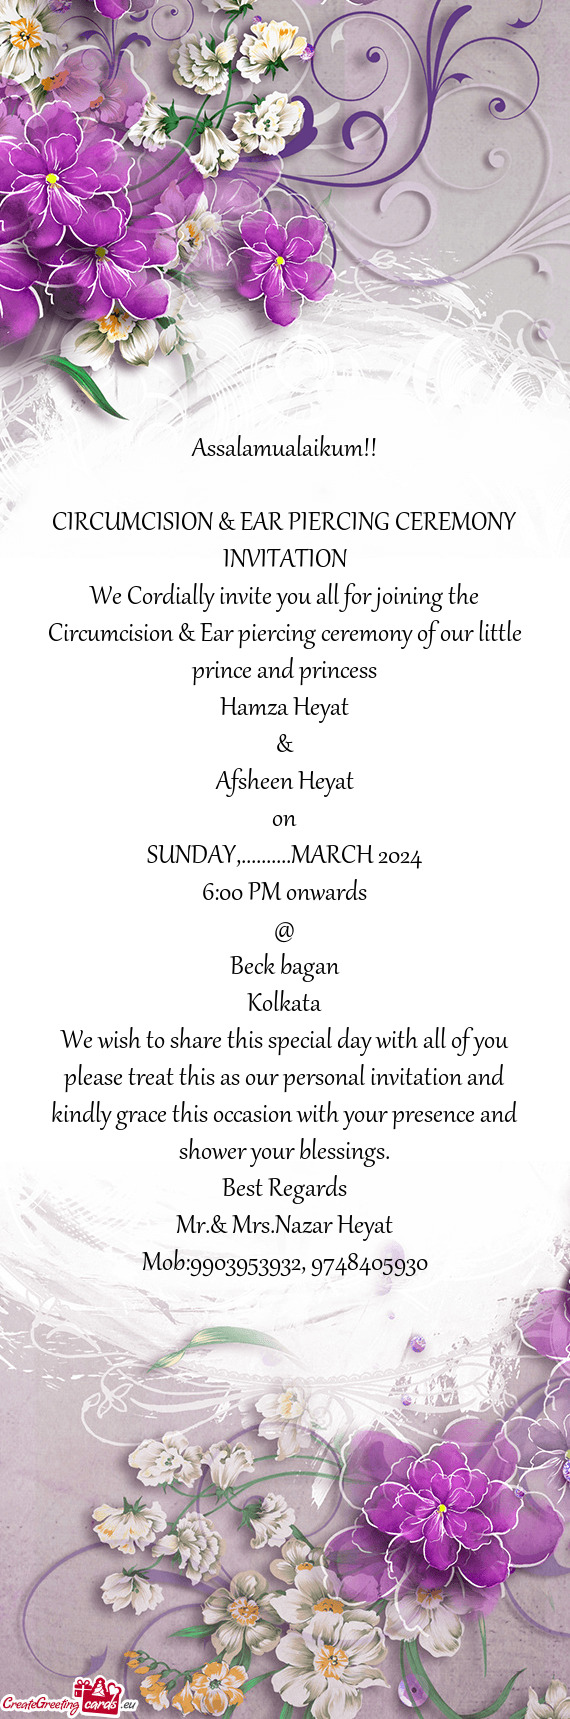 We Cordially invite you all for joining the Circumcision & Ear piercing ceremony of our little princ